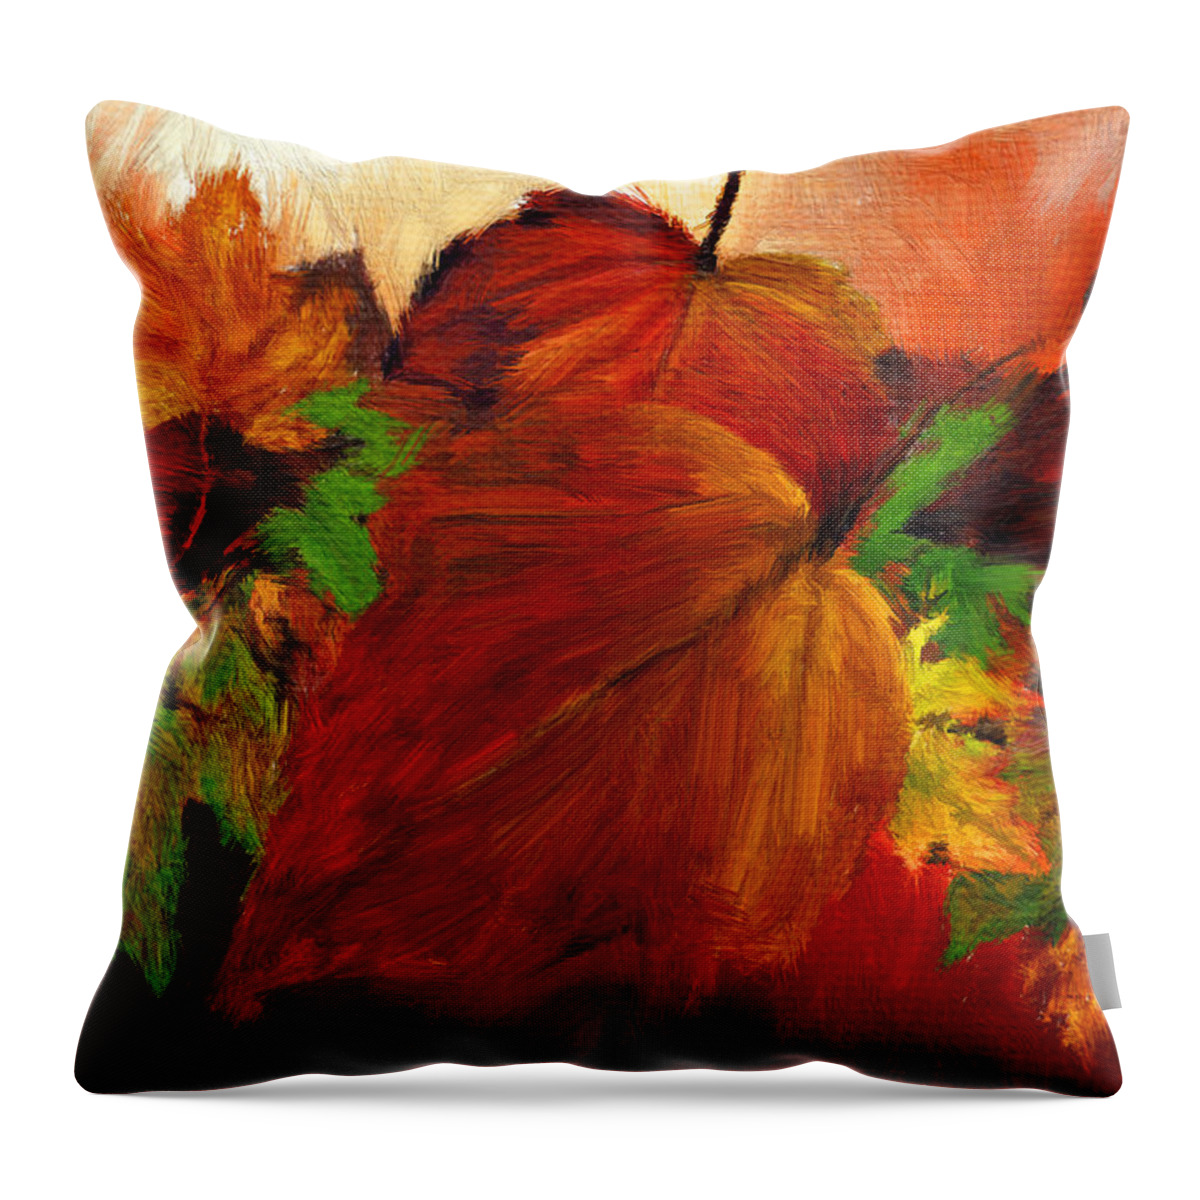 Four Seasons Throw Pillow featuring the digital art Autumn Passion by Lourry Legarde